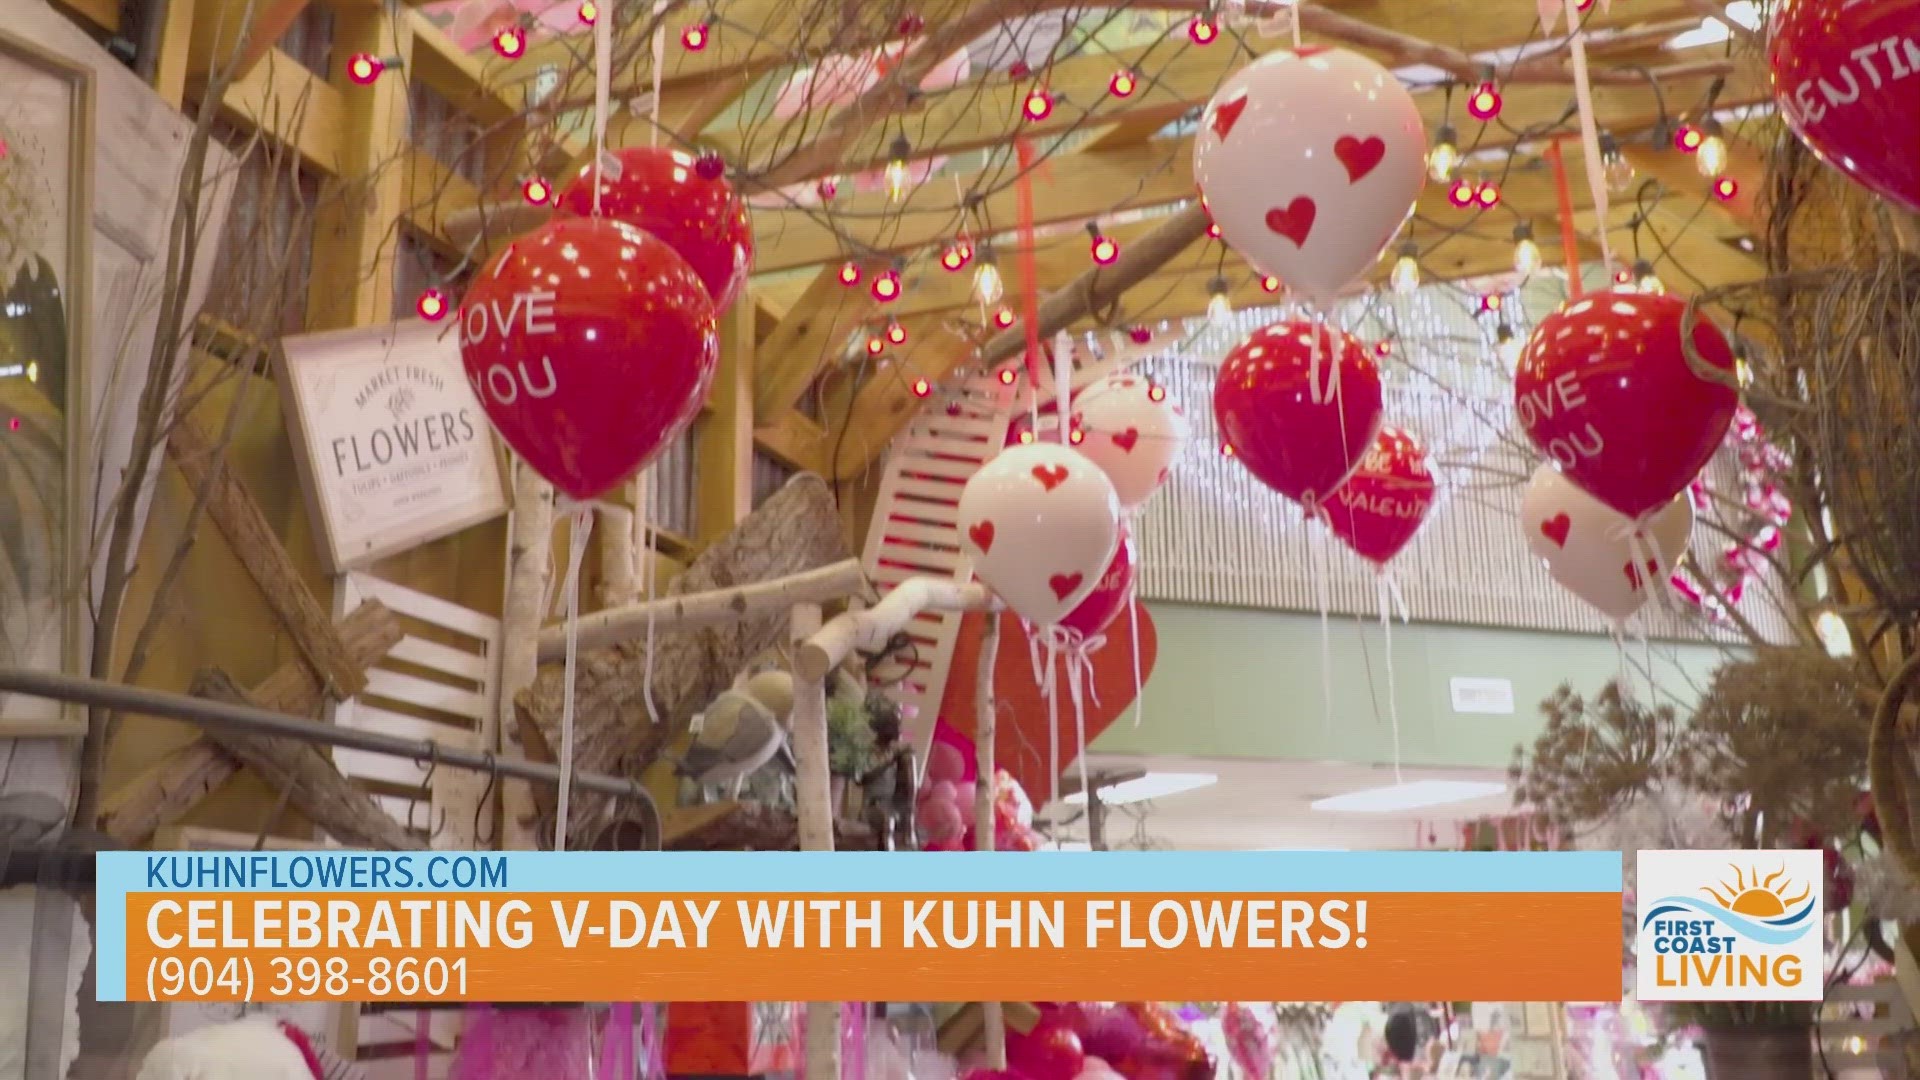 Come to Kuhn Flowers' beautiful store, as well as placing your orders on line or via phone